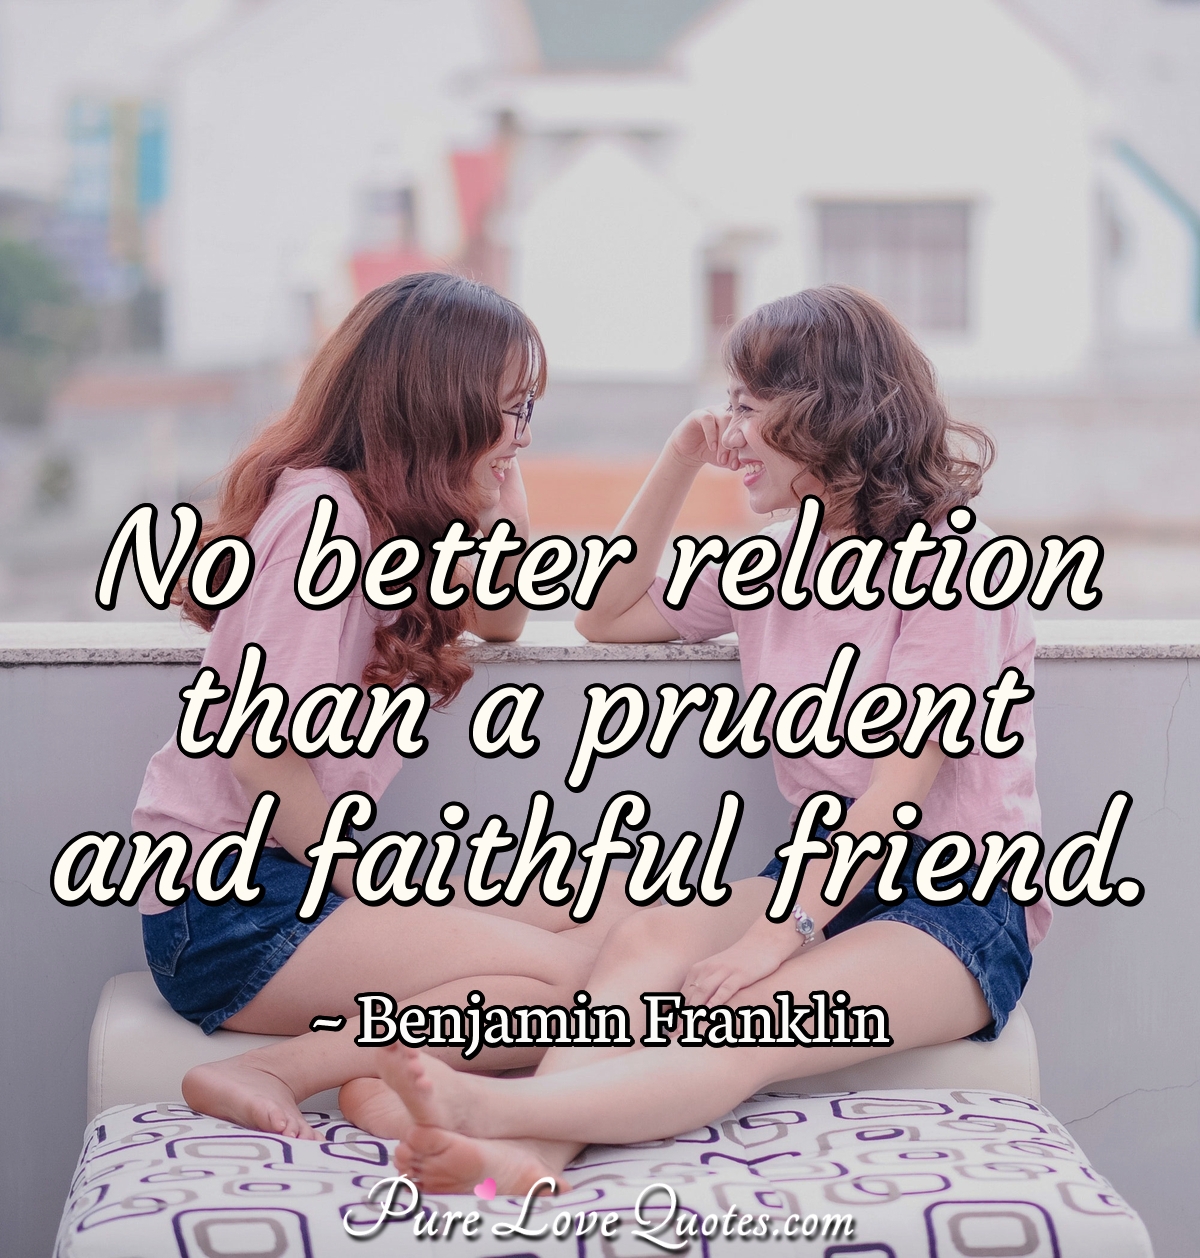 No better relation than a prudent and faithful friend. - Benjamin Franklin